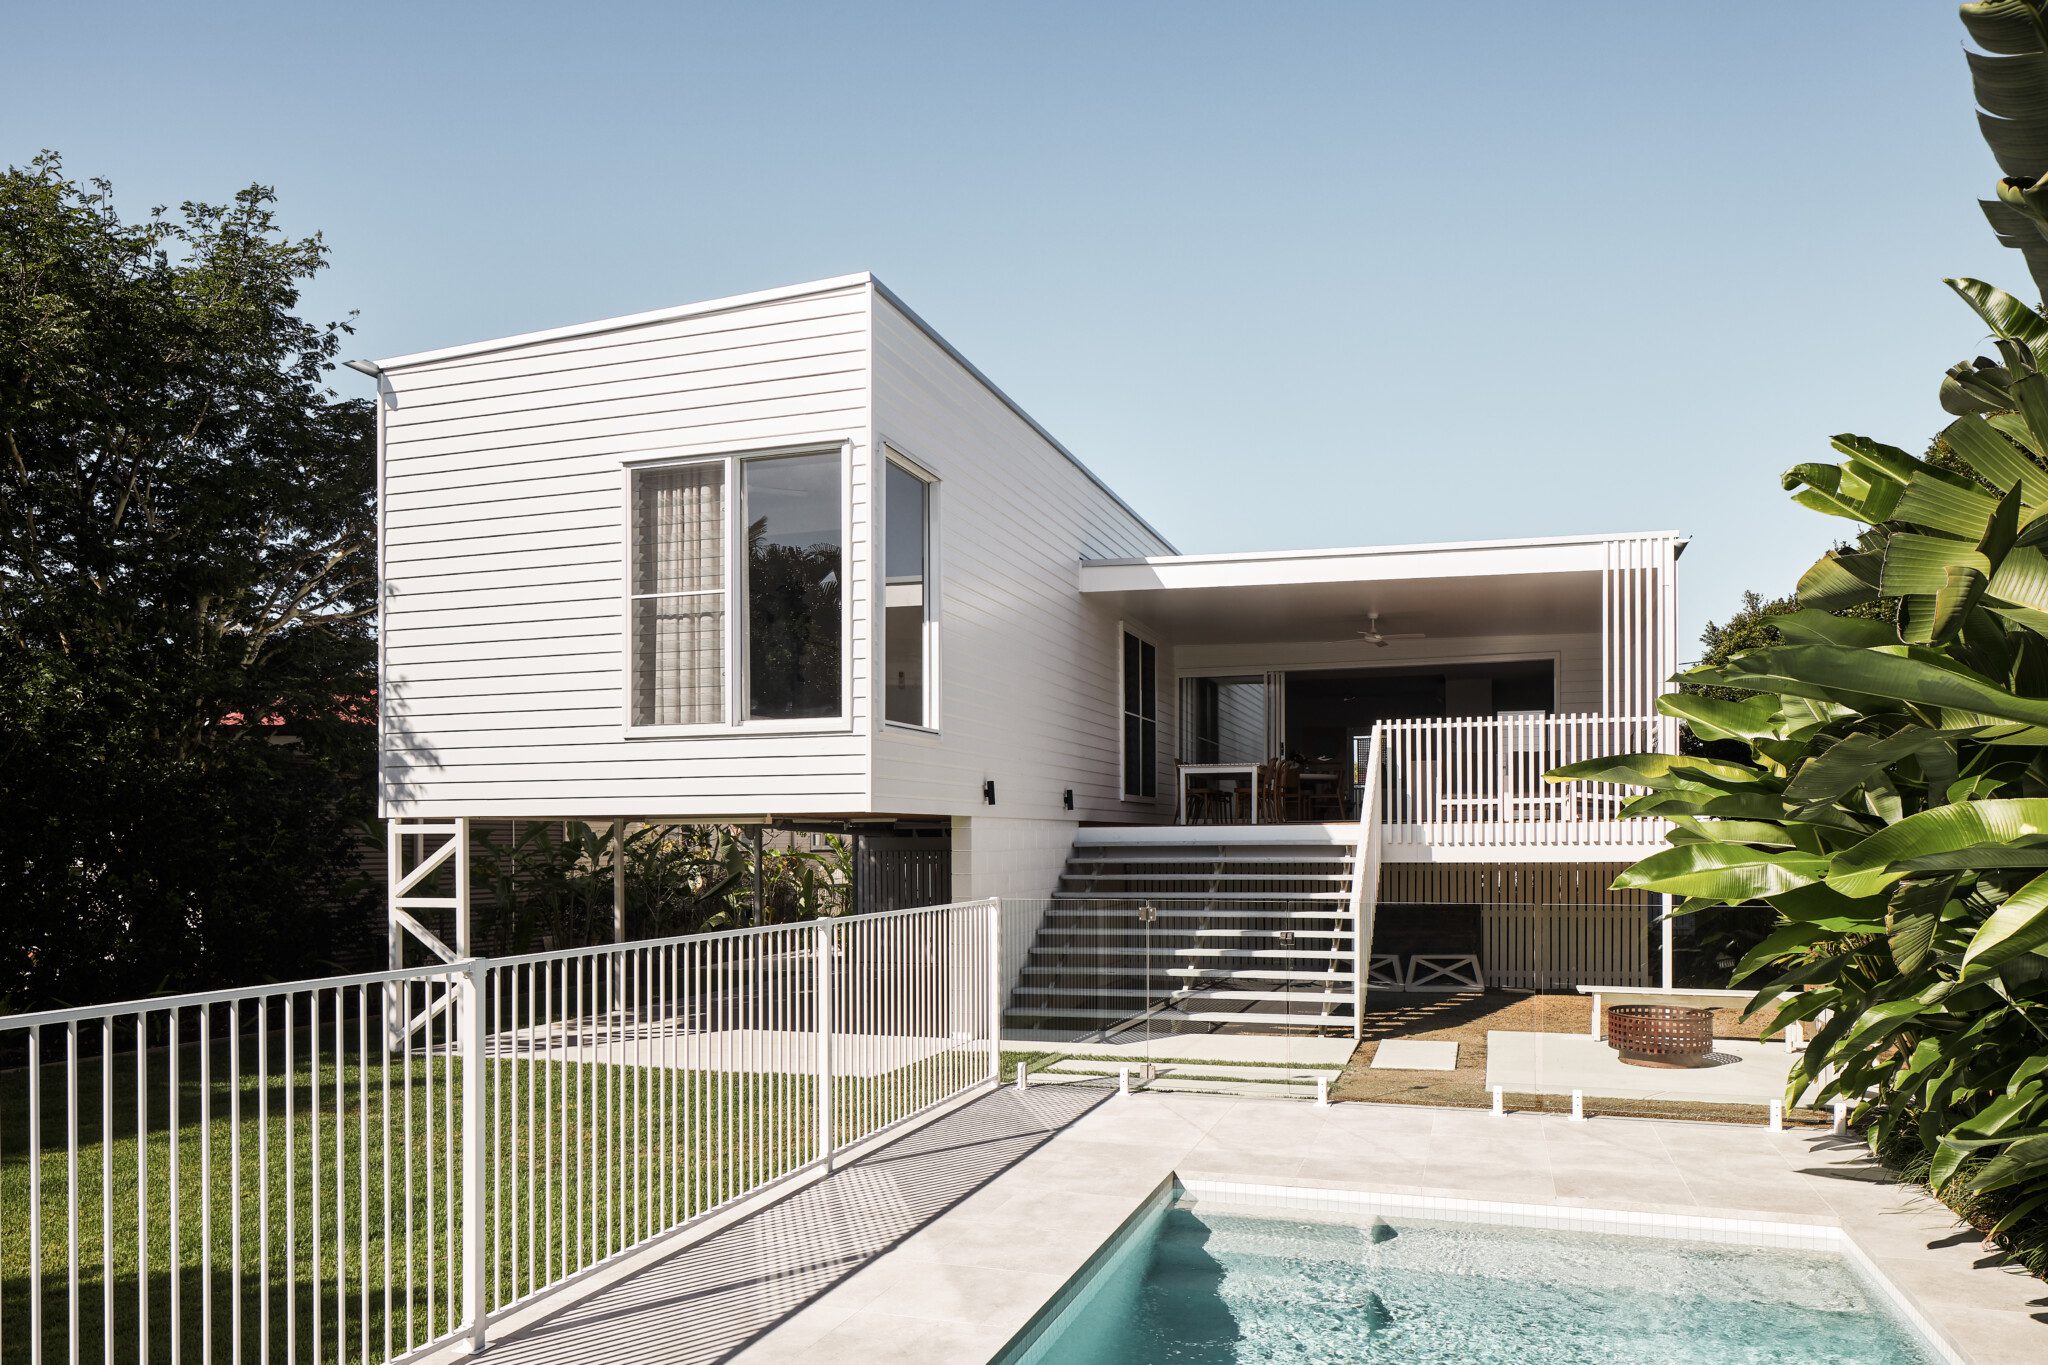 Nanda House – White Queenslander with modern extension